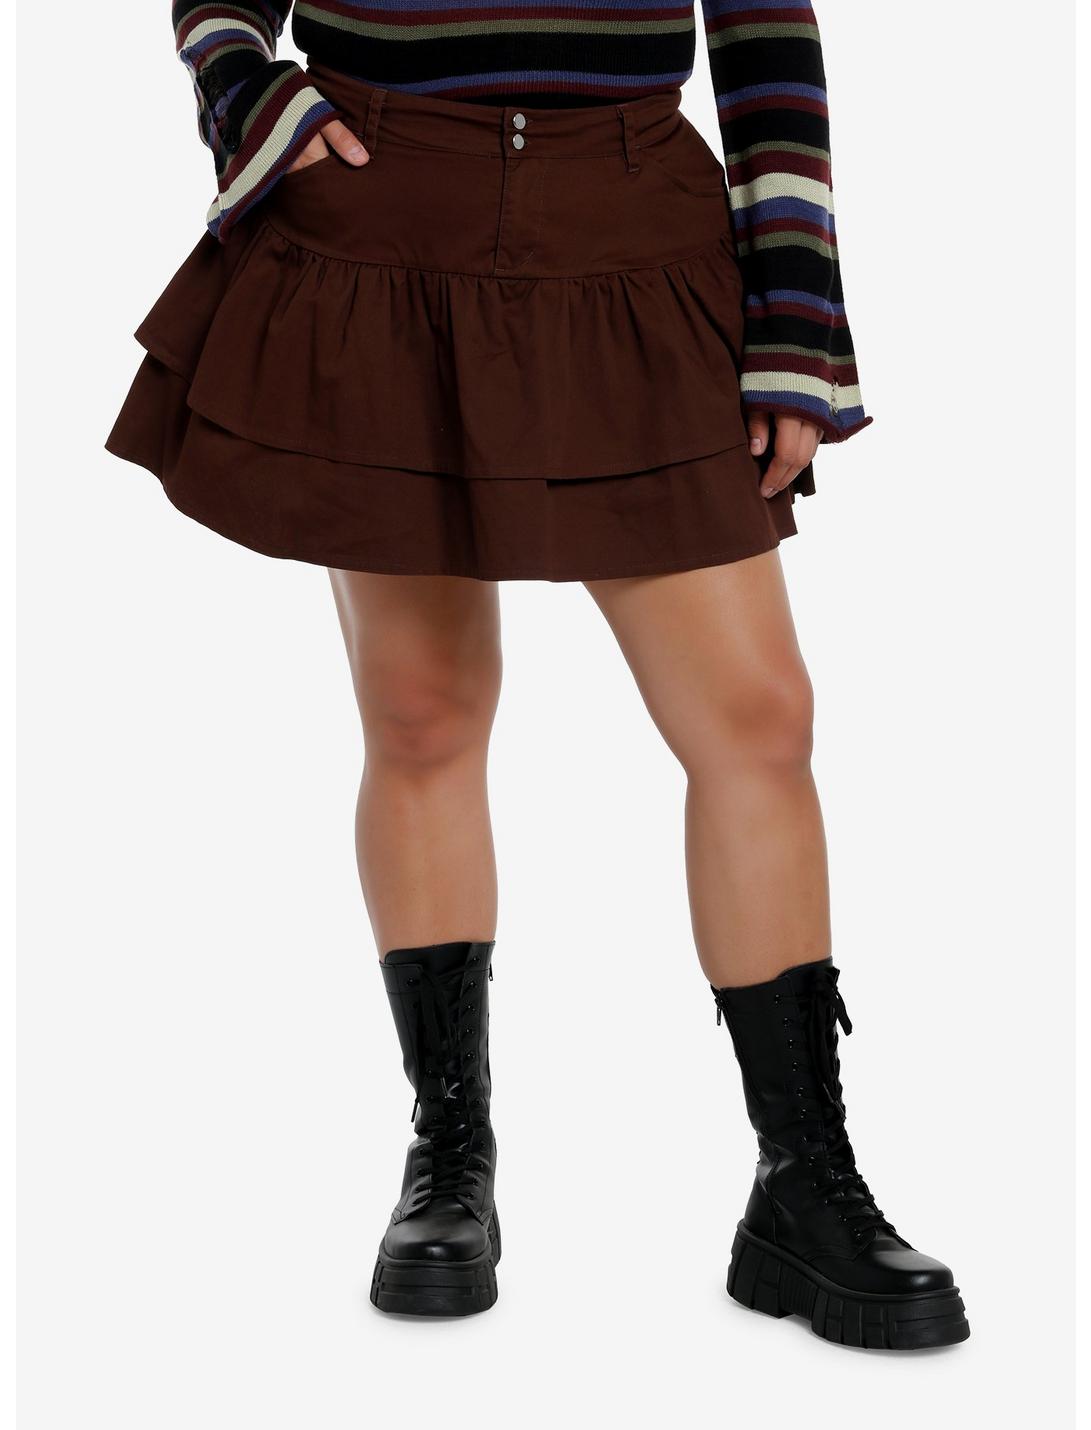 Social Collision Brown Double Ruffle Skirt Plus Size, BROWN, hi-res